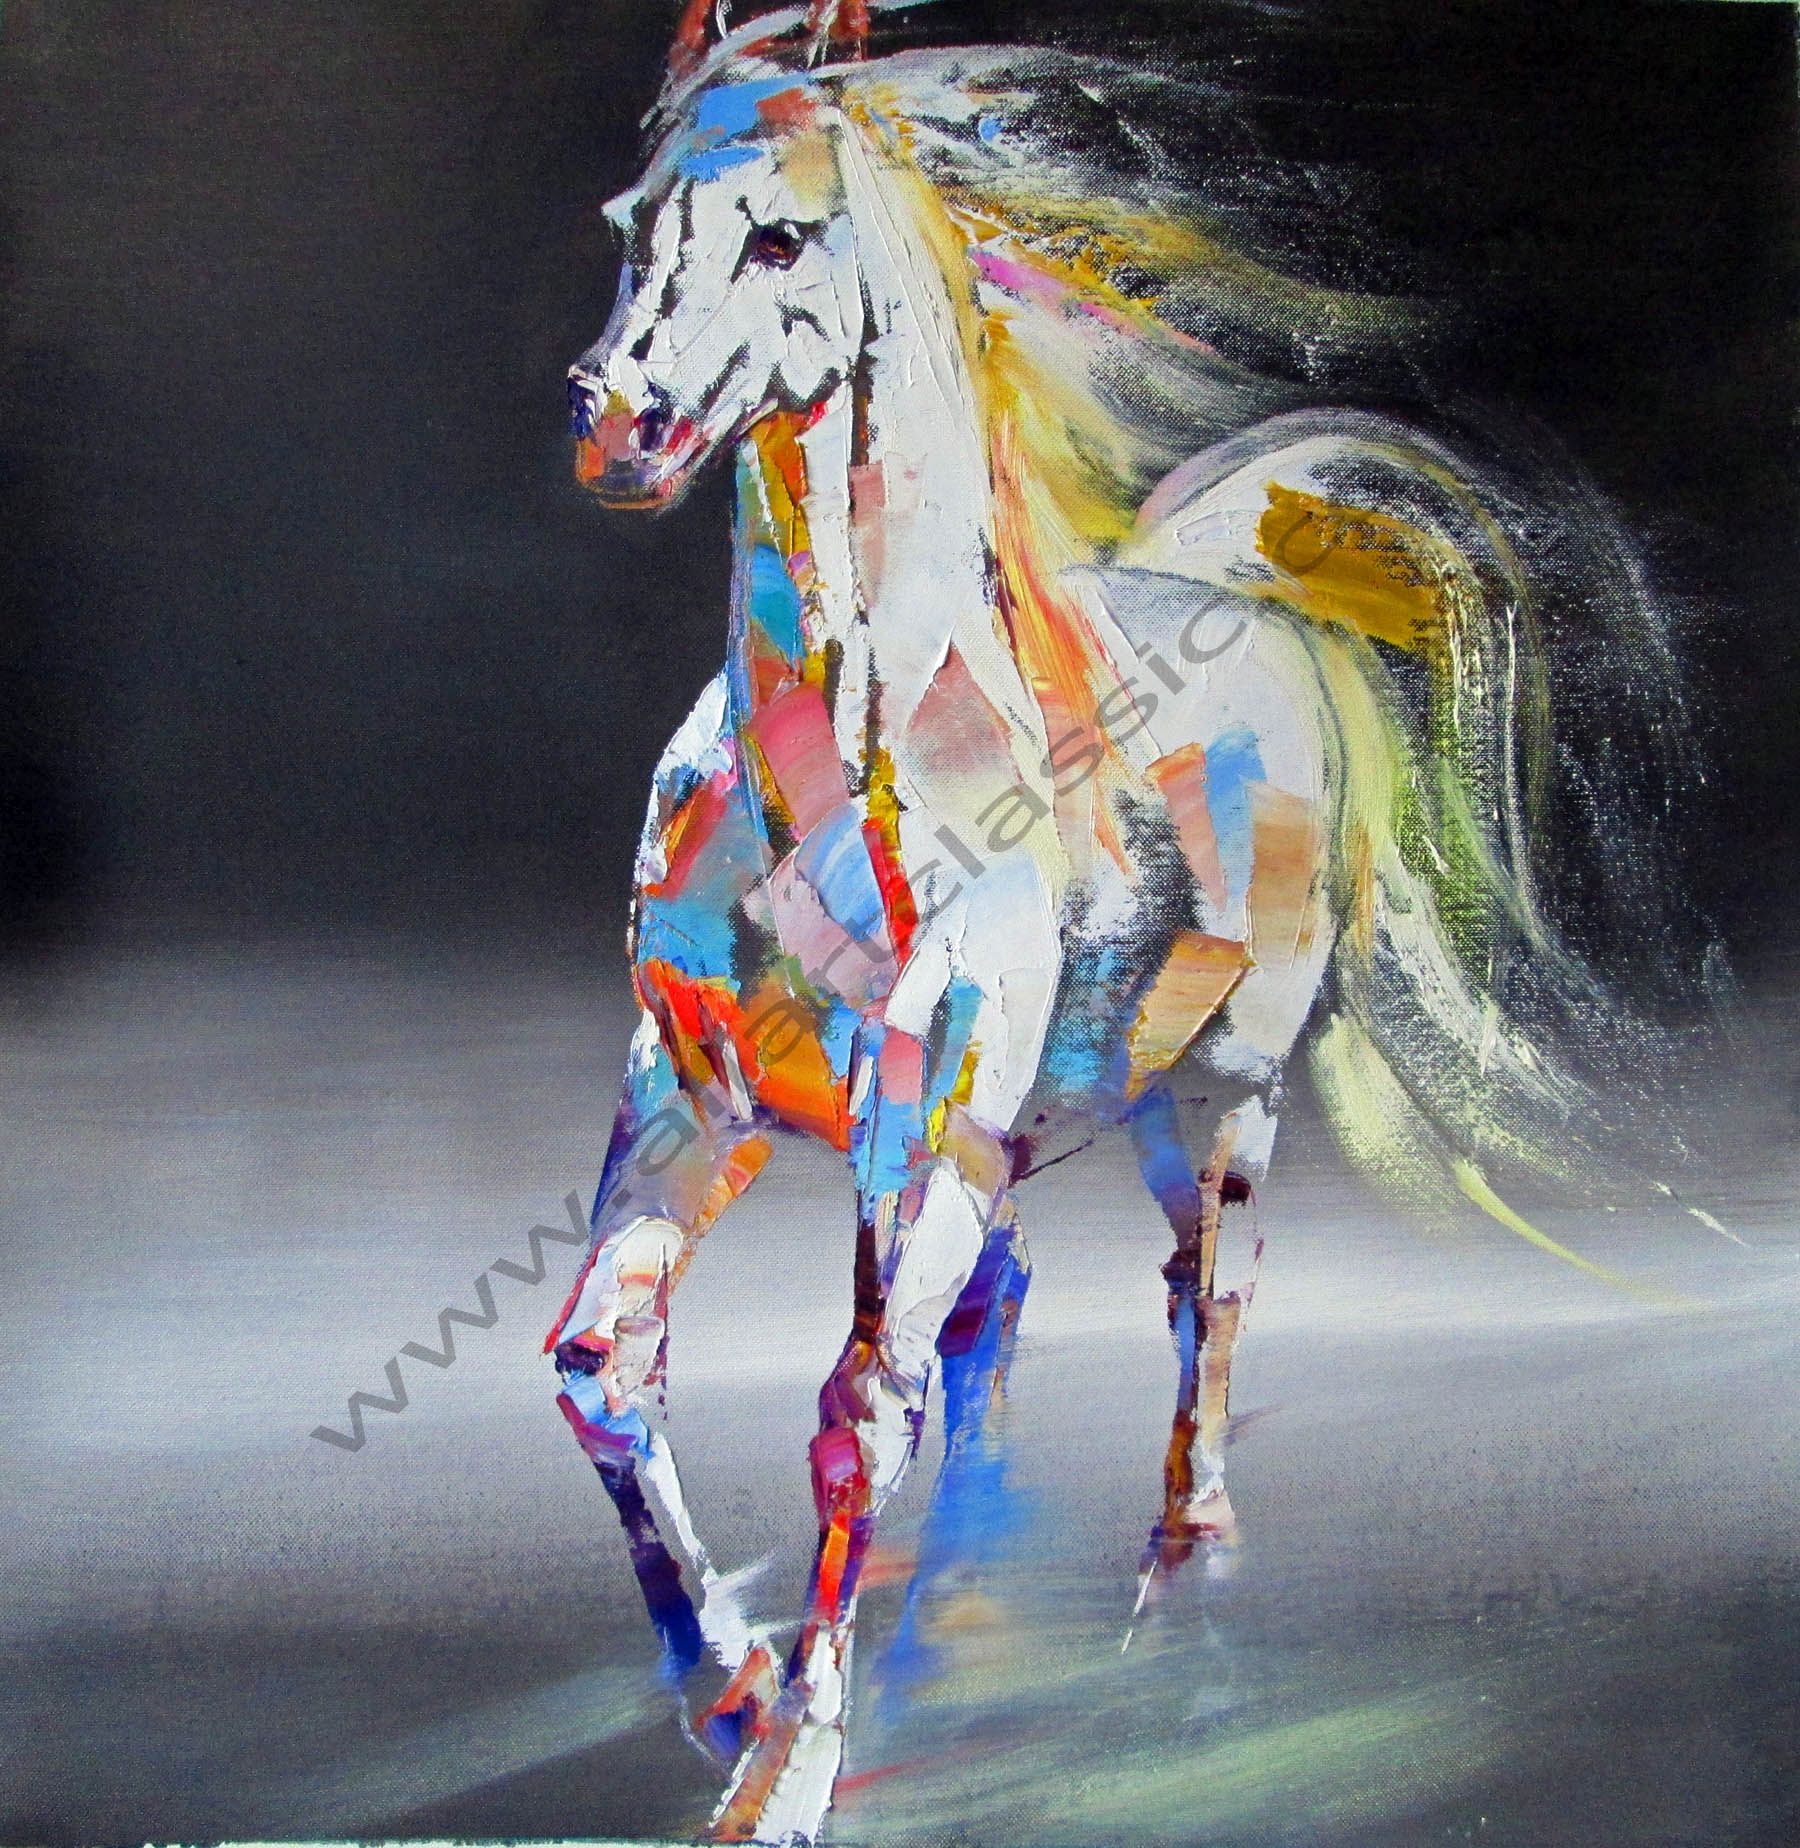 Cheap Paintings for Sale - The White Horse, Abstract Art